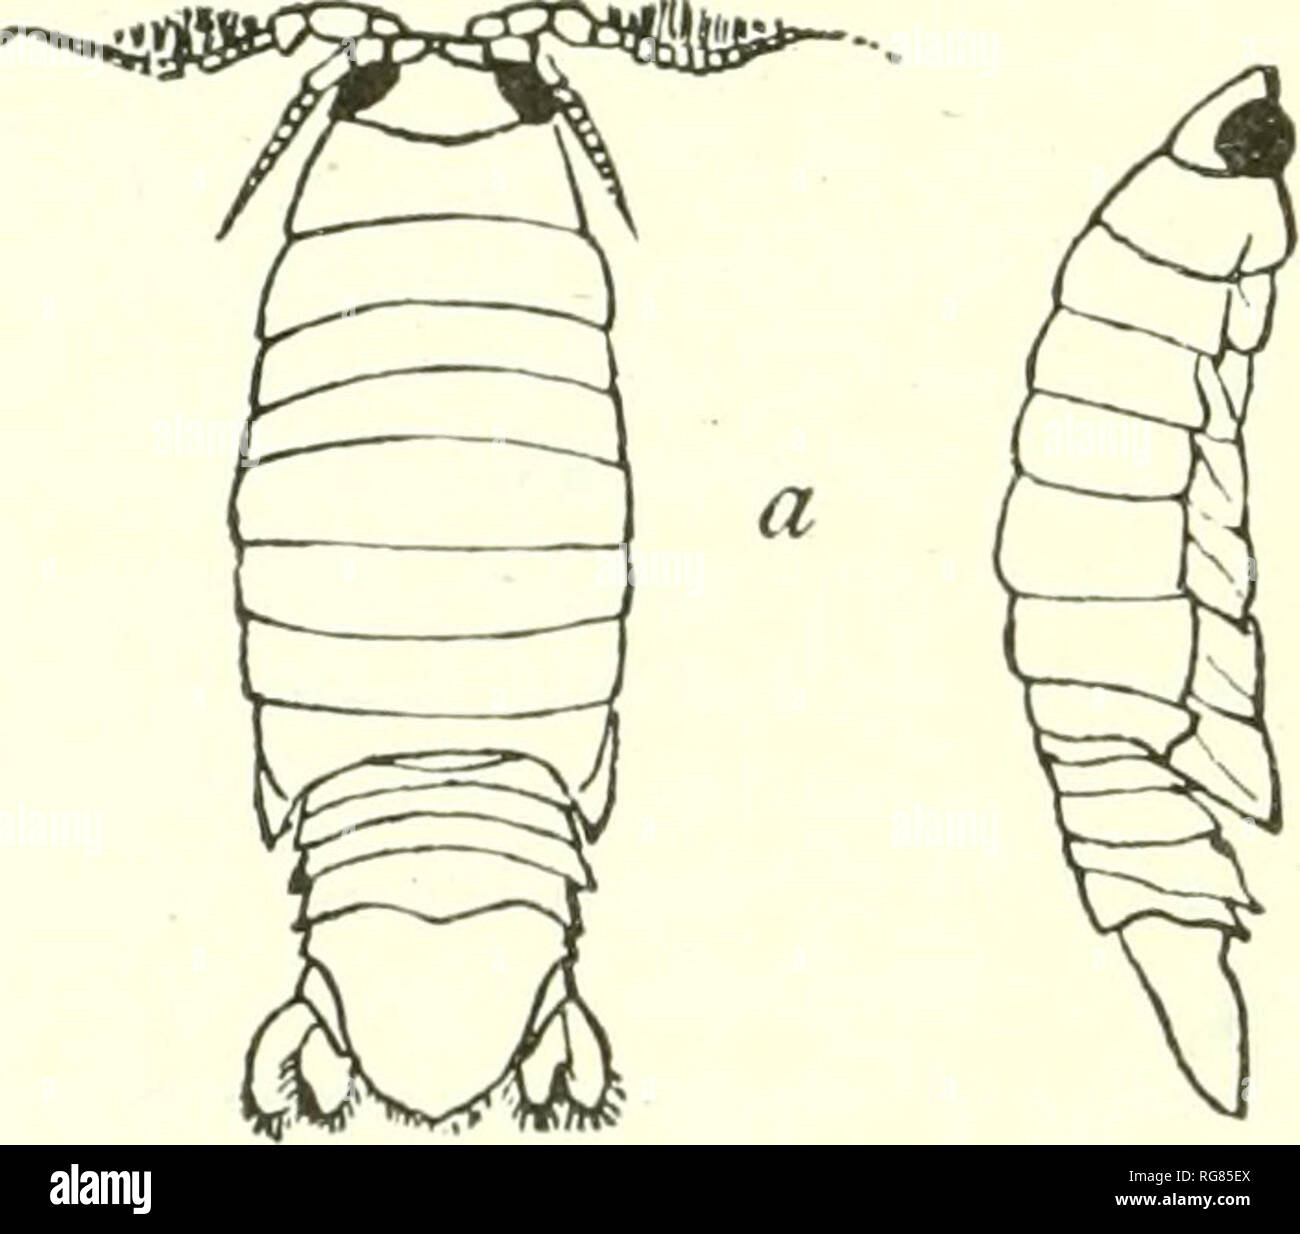 . Bulletin - United States National Museum. Science. Fig. 67.—CiROLANA mayana (After Ives), a. Fifth leg (right side), h, Dorsal view of right ANTENNA OF SECOND PAIR, r, ANTERIOR VIEW OF SAME, (l, LAST SEGMENT OF ABDOMEN WITH URO- lODA. f, First leg (right side). /, Fourth leg (right side). of articles. The genus Brmicli uropus Moore is characterized as hav- ing- the maxillipeds two-jointed. Only one specimen of the species, B. Uttoralls^ was obtained, and it seems as though there might be. 0 fern o Fig. 68.—Cirolana mayana (After Ives). a, Dorsal view, x 4. 6, Right side, x 4. c, Seventh thor Stock Photo